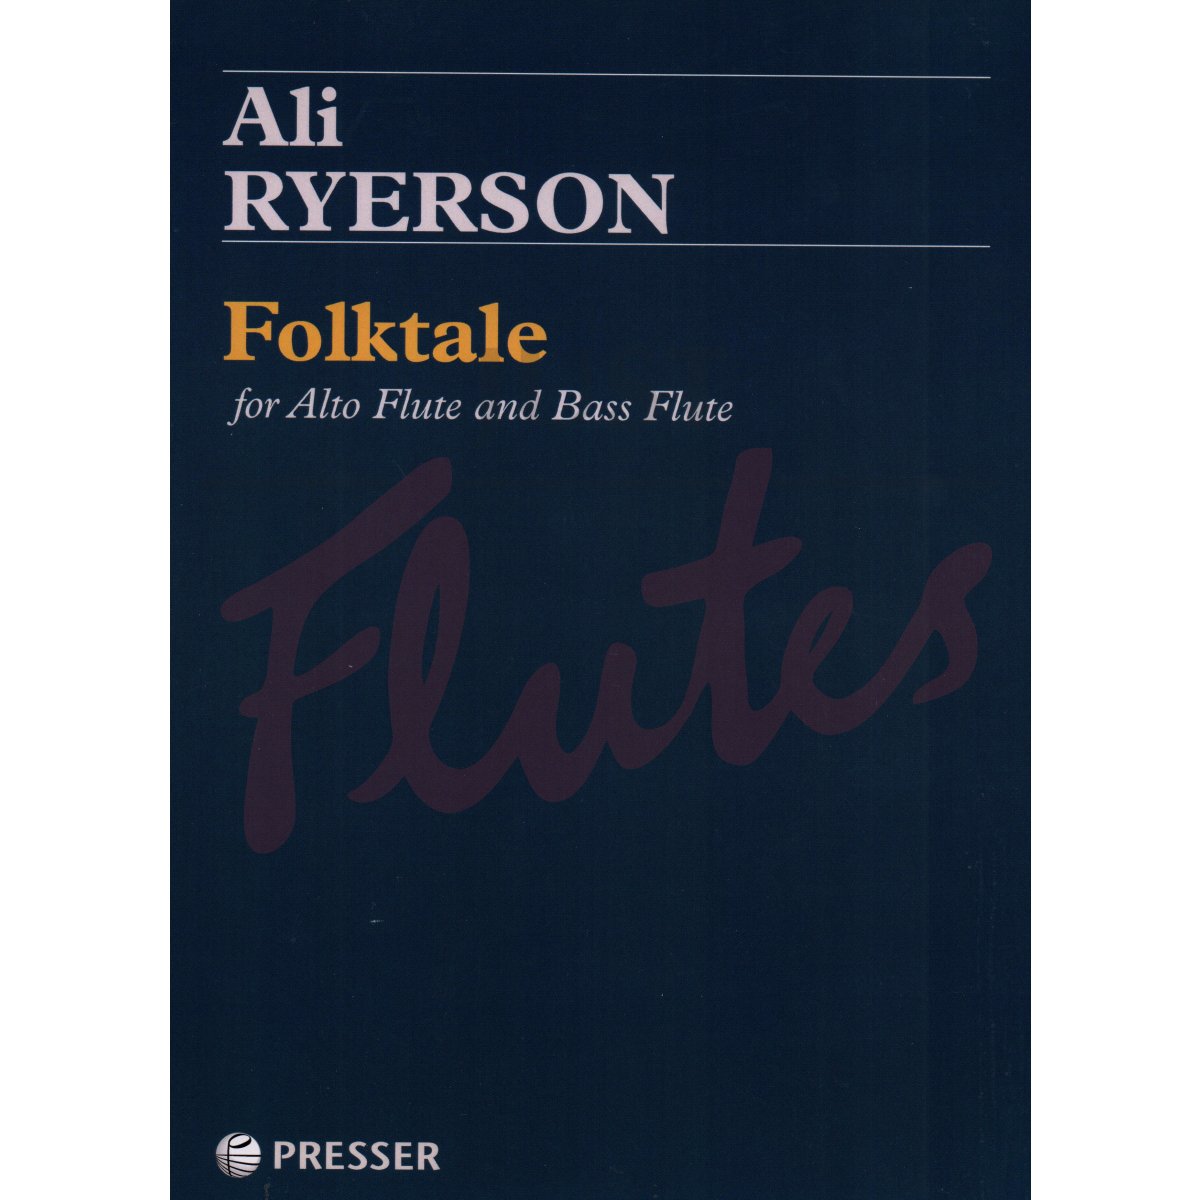 Folktale for Alto Flute and Bass Flute